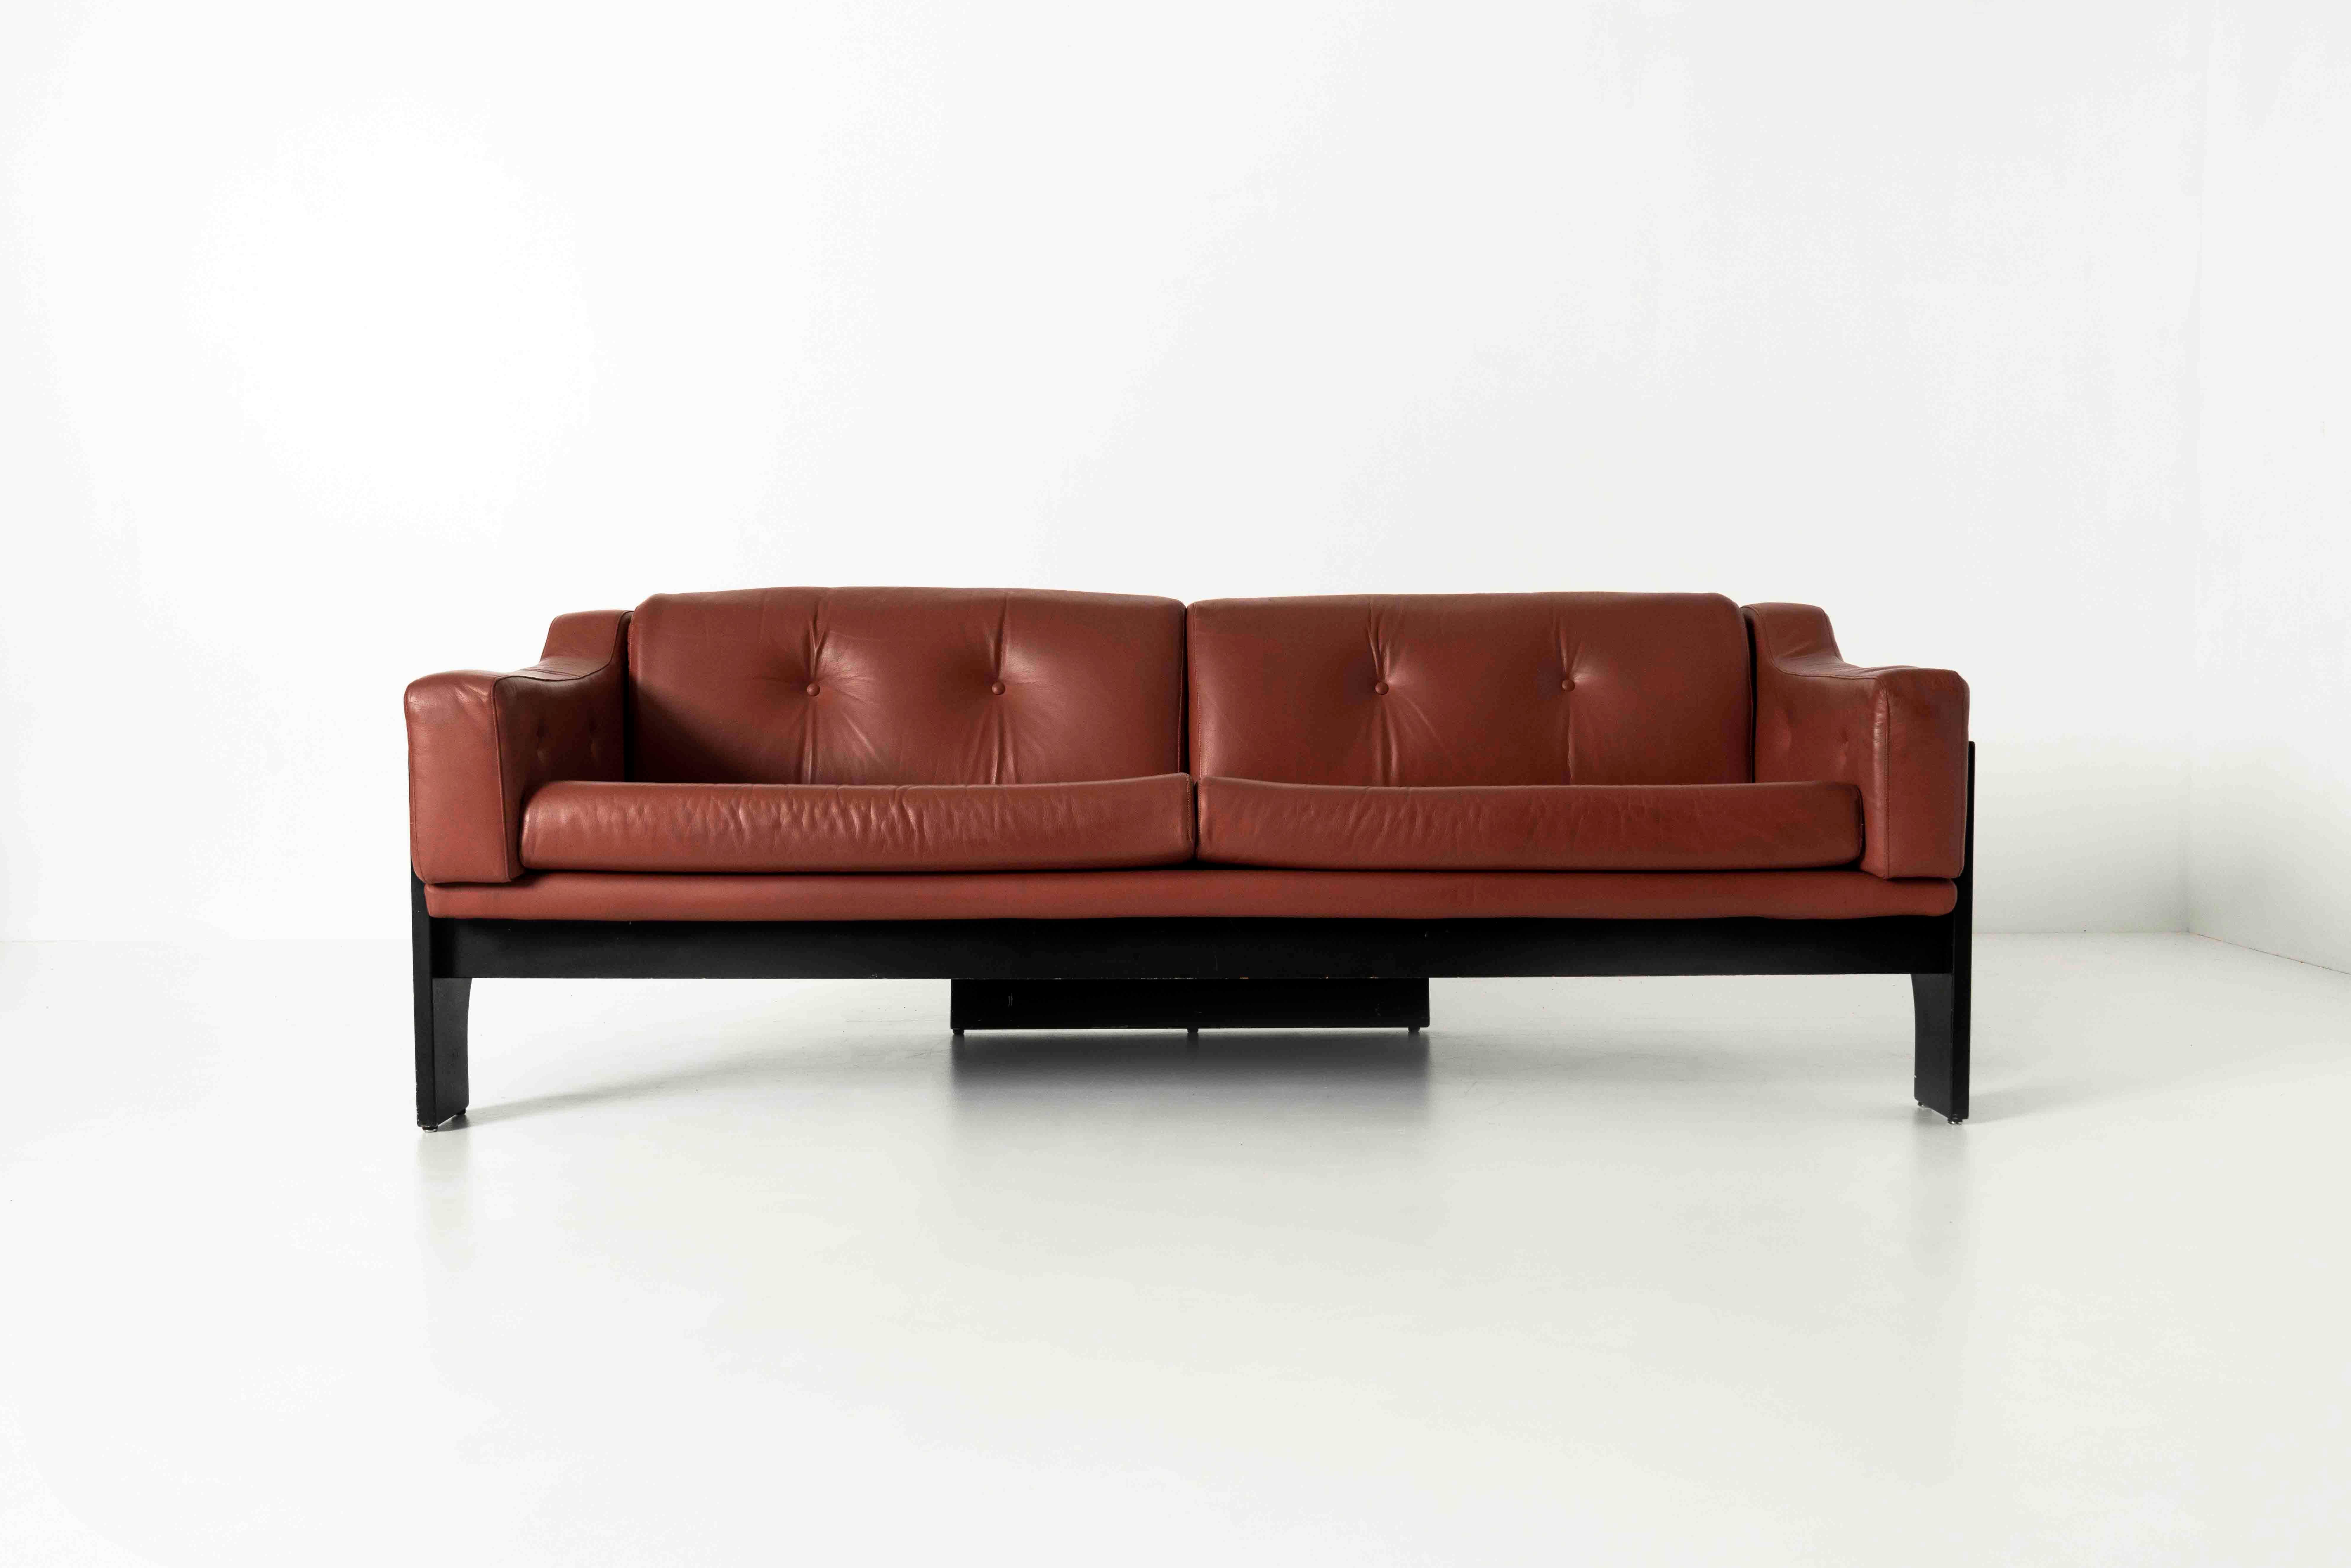 Impressive three-seater oriolo sofa by Claudio Salocchi for Sormani from Italy 1960s. This sofa has an exceptional design with the sides and the back in architectural shapes. The leather cushions are in good condition and have a very attractive